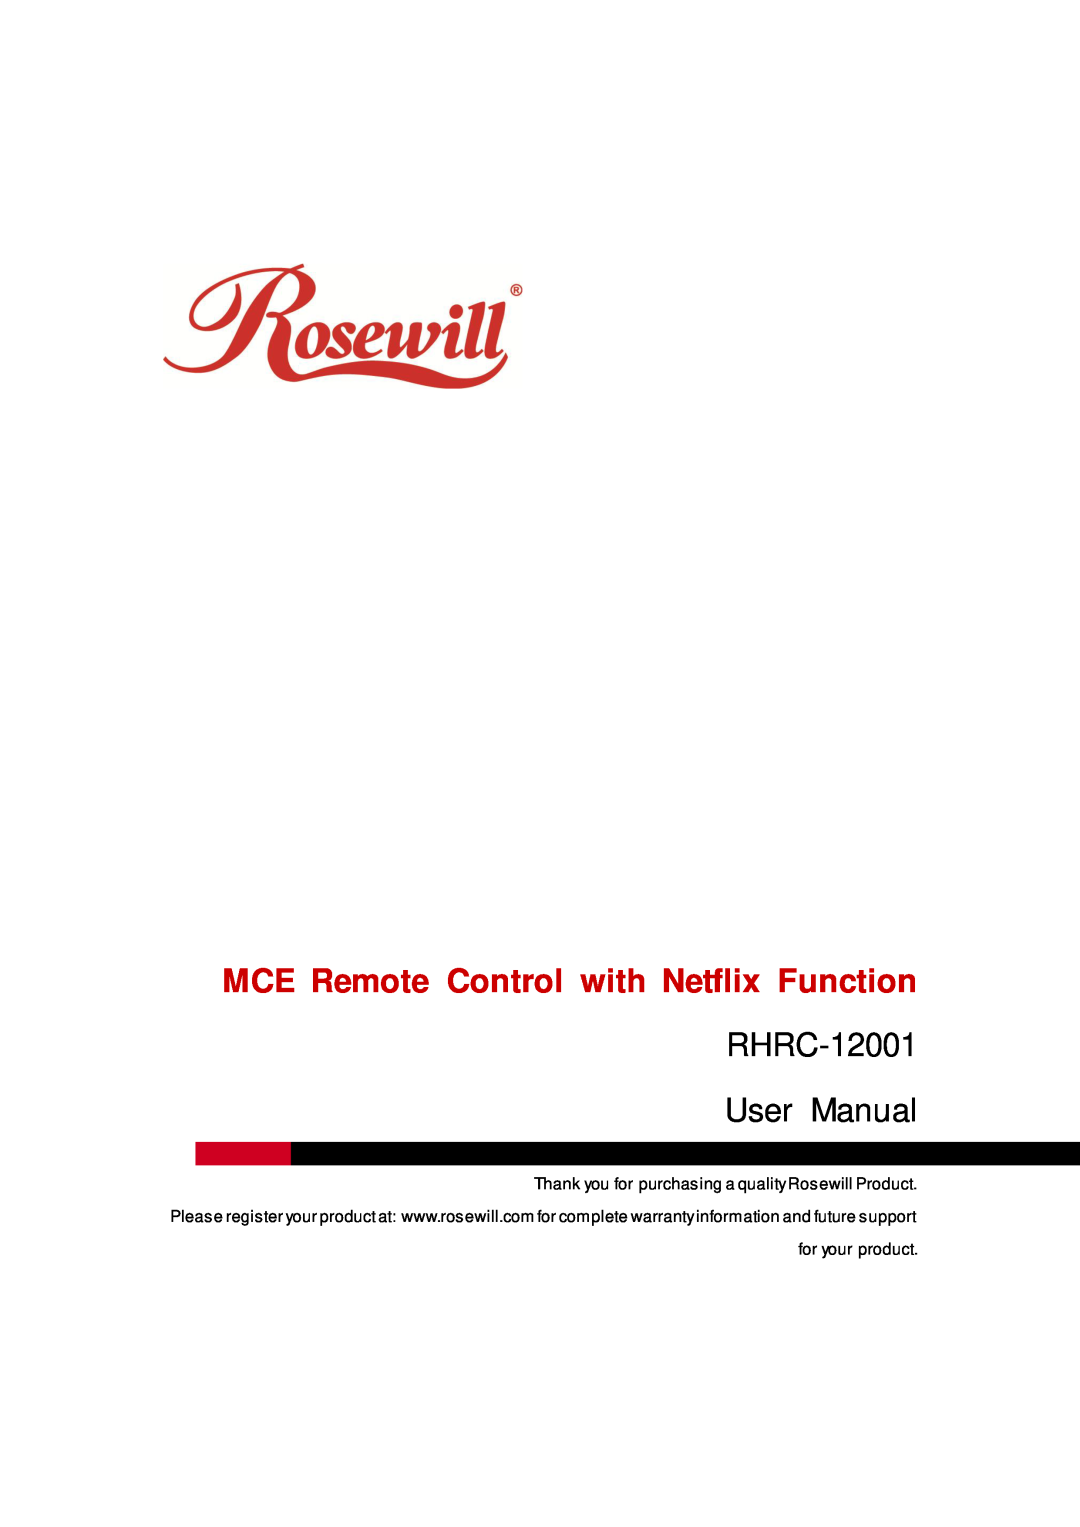 Rosewill RHRC-12001 user manual MCE Remote Control with Netflix Function 